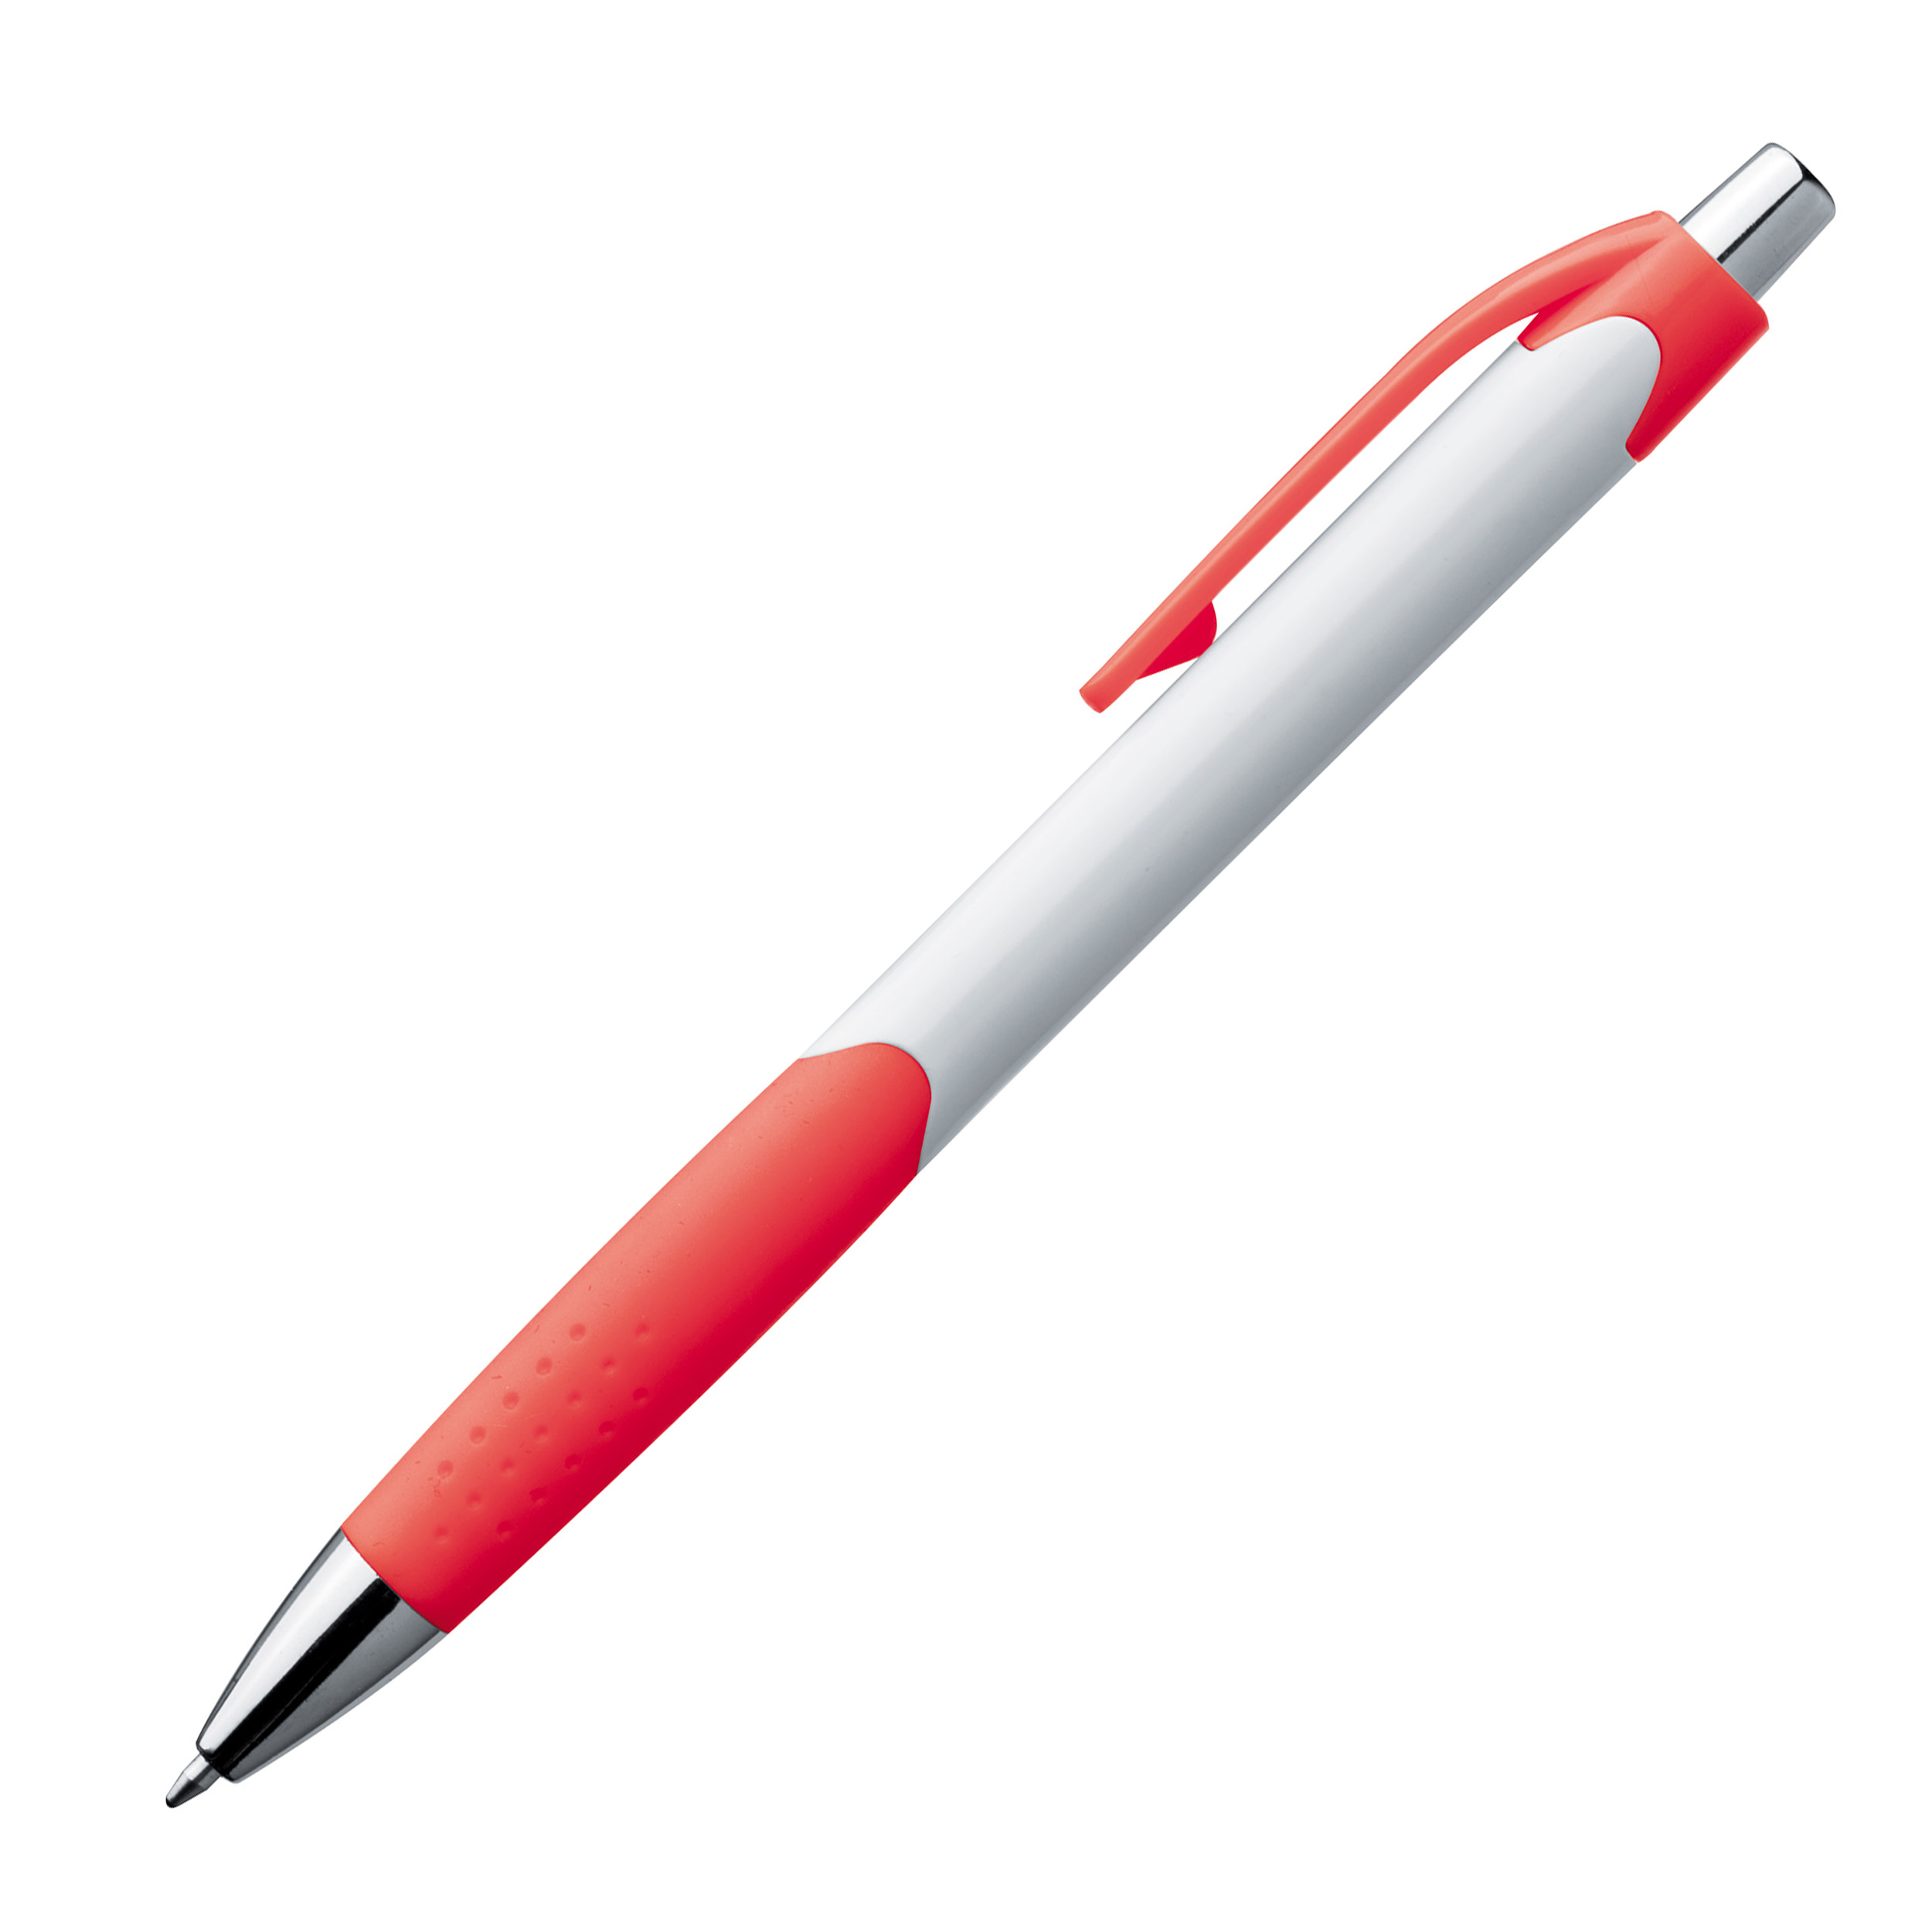 Plastic ball pen with white shaft and rubber grip zone